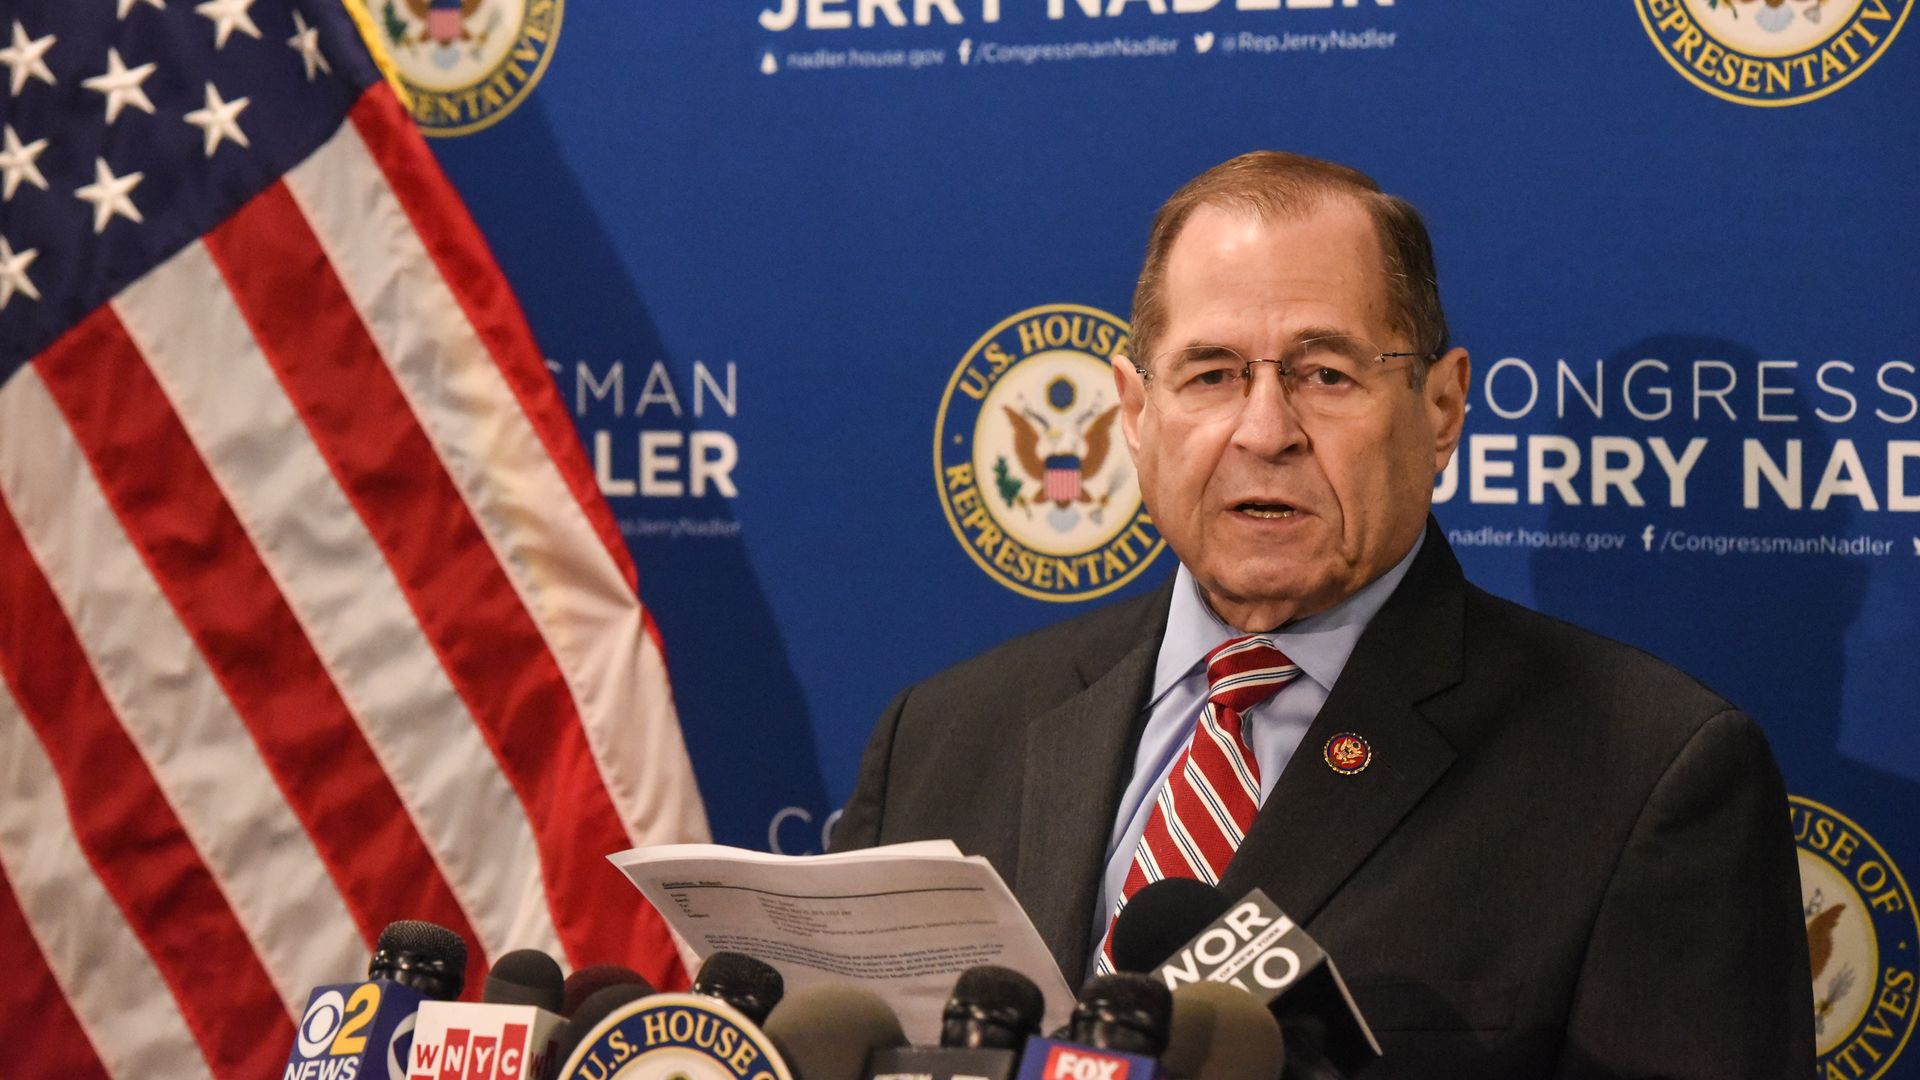  Committee Chairman of U.S. House Judiciary Committee Rep. Jerry Nadler (D-NY) speaks to members of the press on May 29.